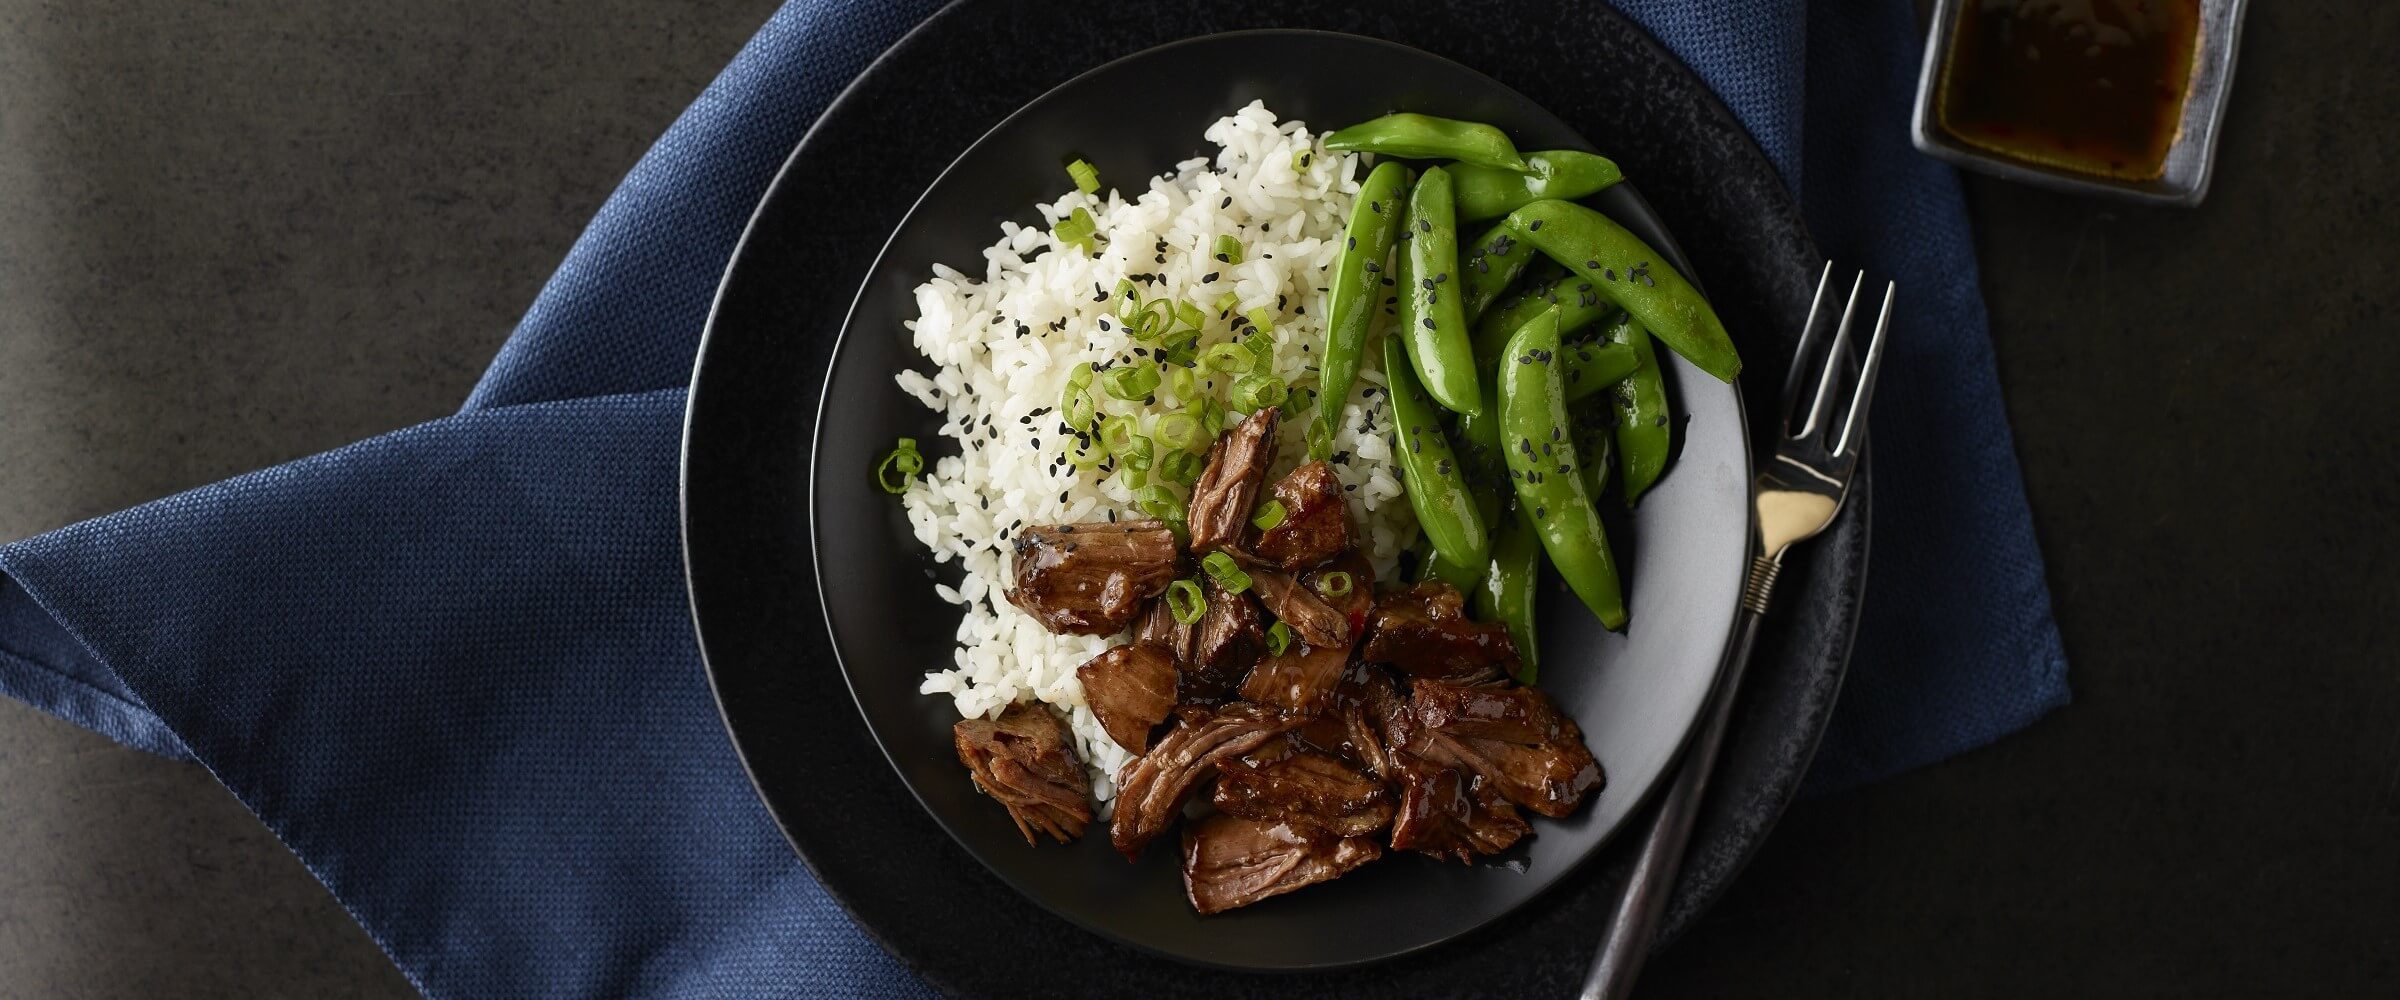 Sweet and sour beef with rice and pea pods in black bowl with blue napkin